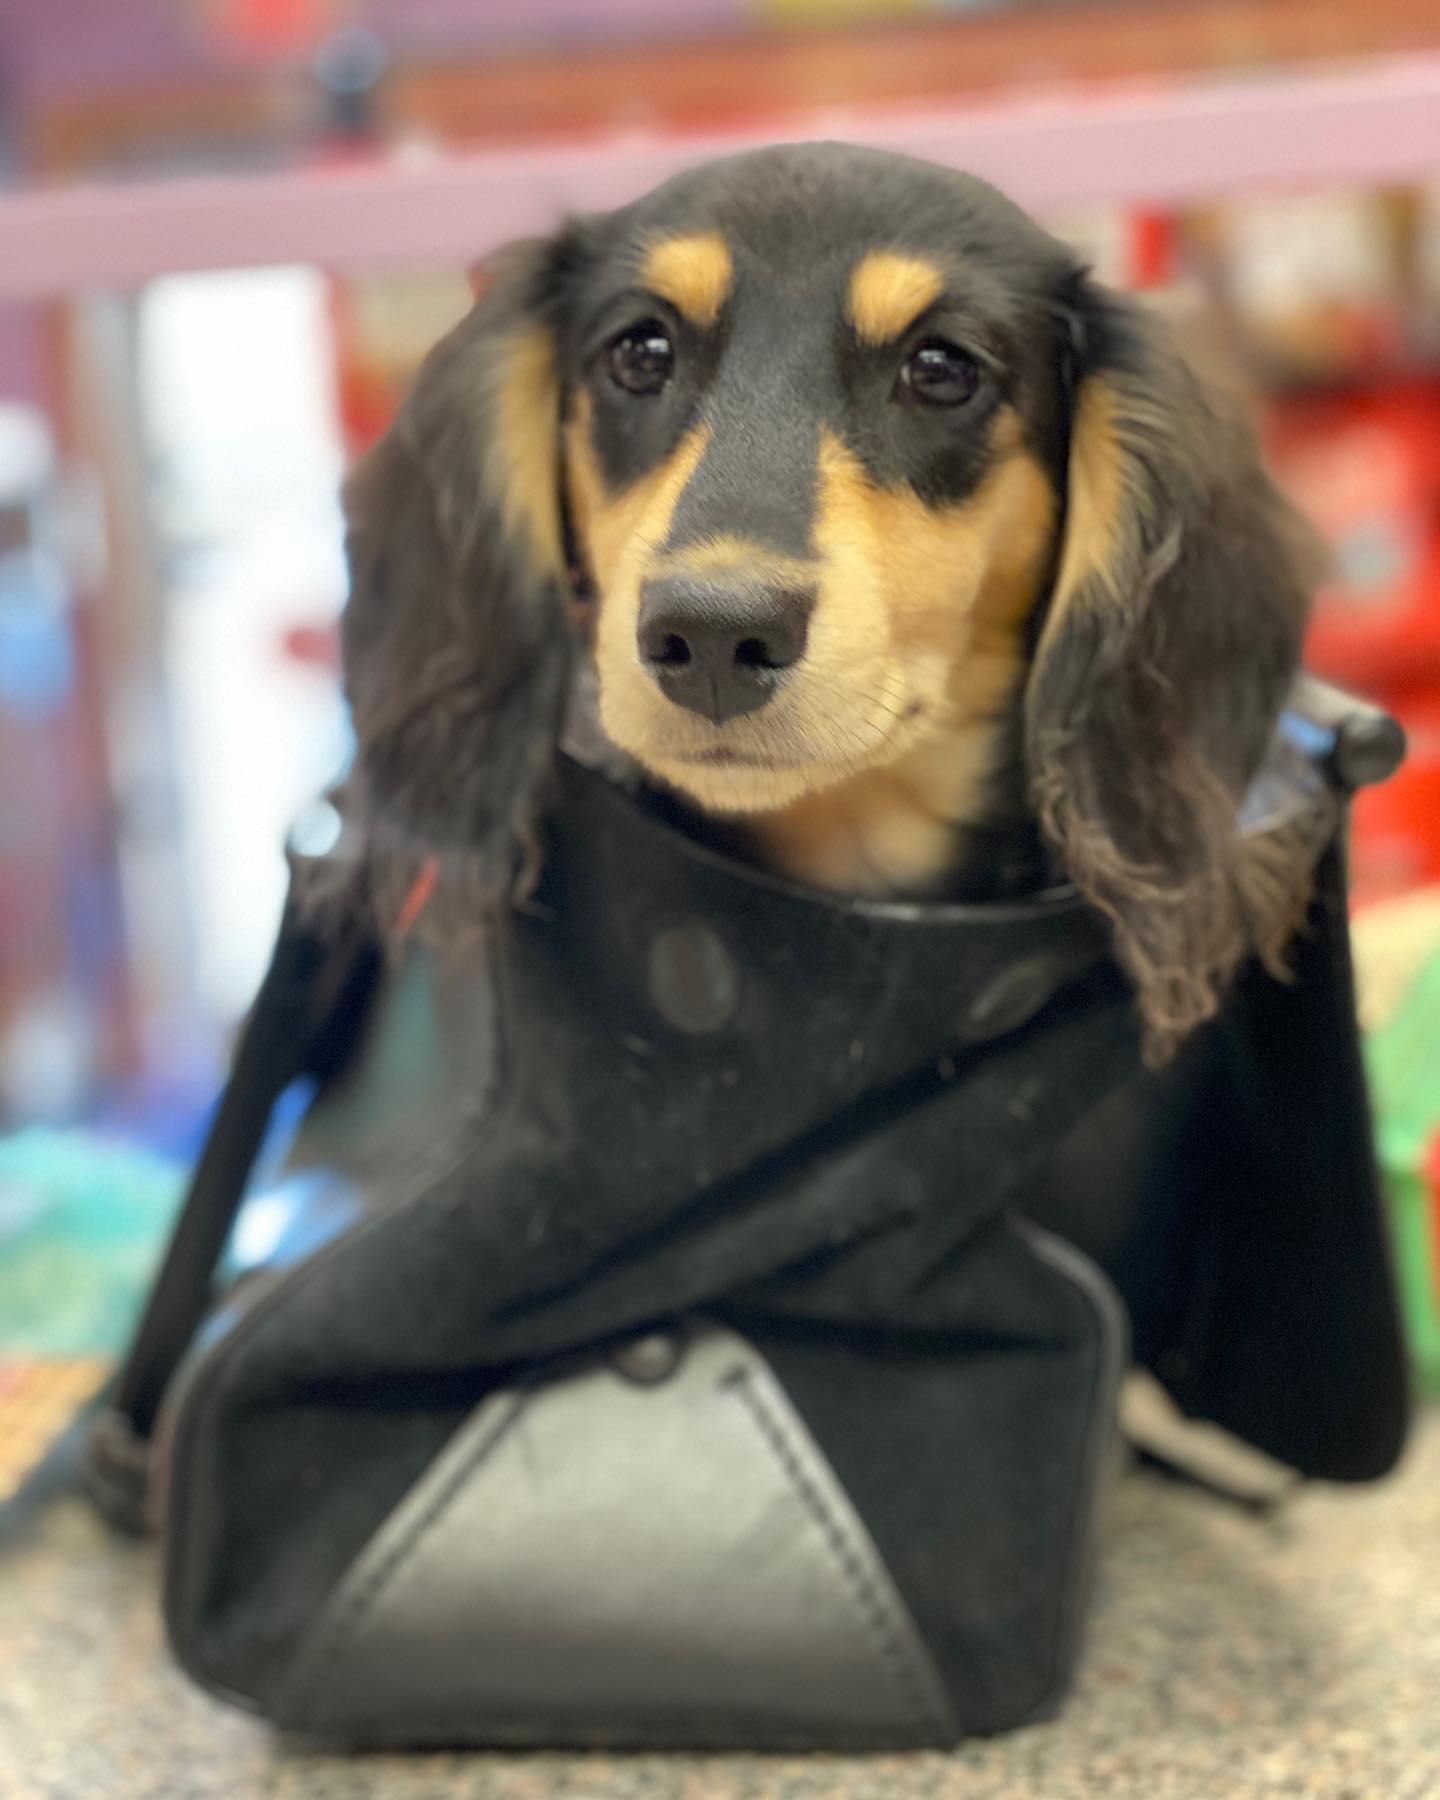 Unleashed is a locally owned family operated business in New Hampshire. We are a one-stop pet store offering a personalized customer experience to every visitor that walks through our door.